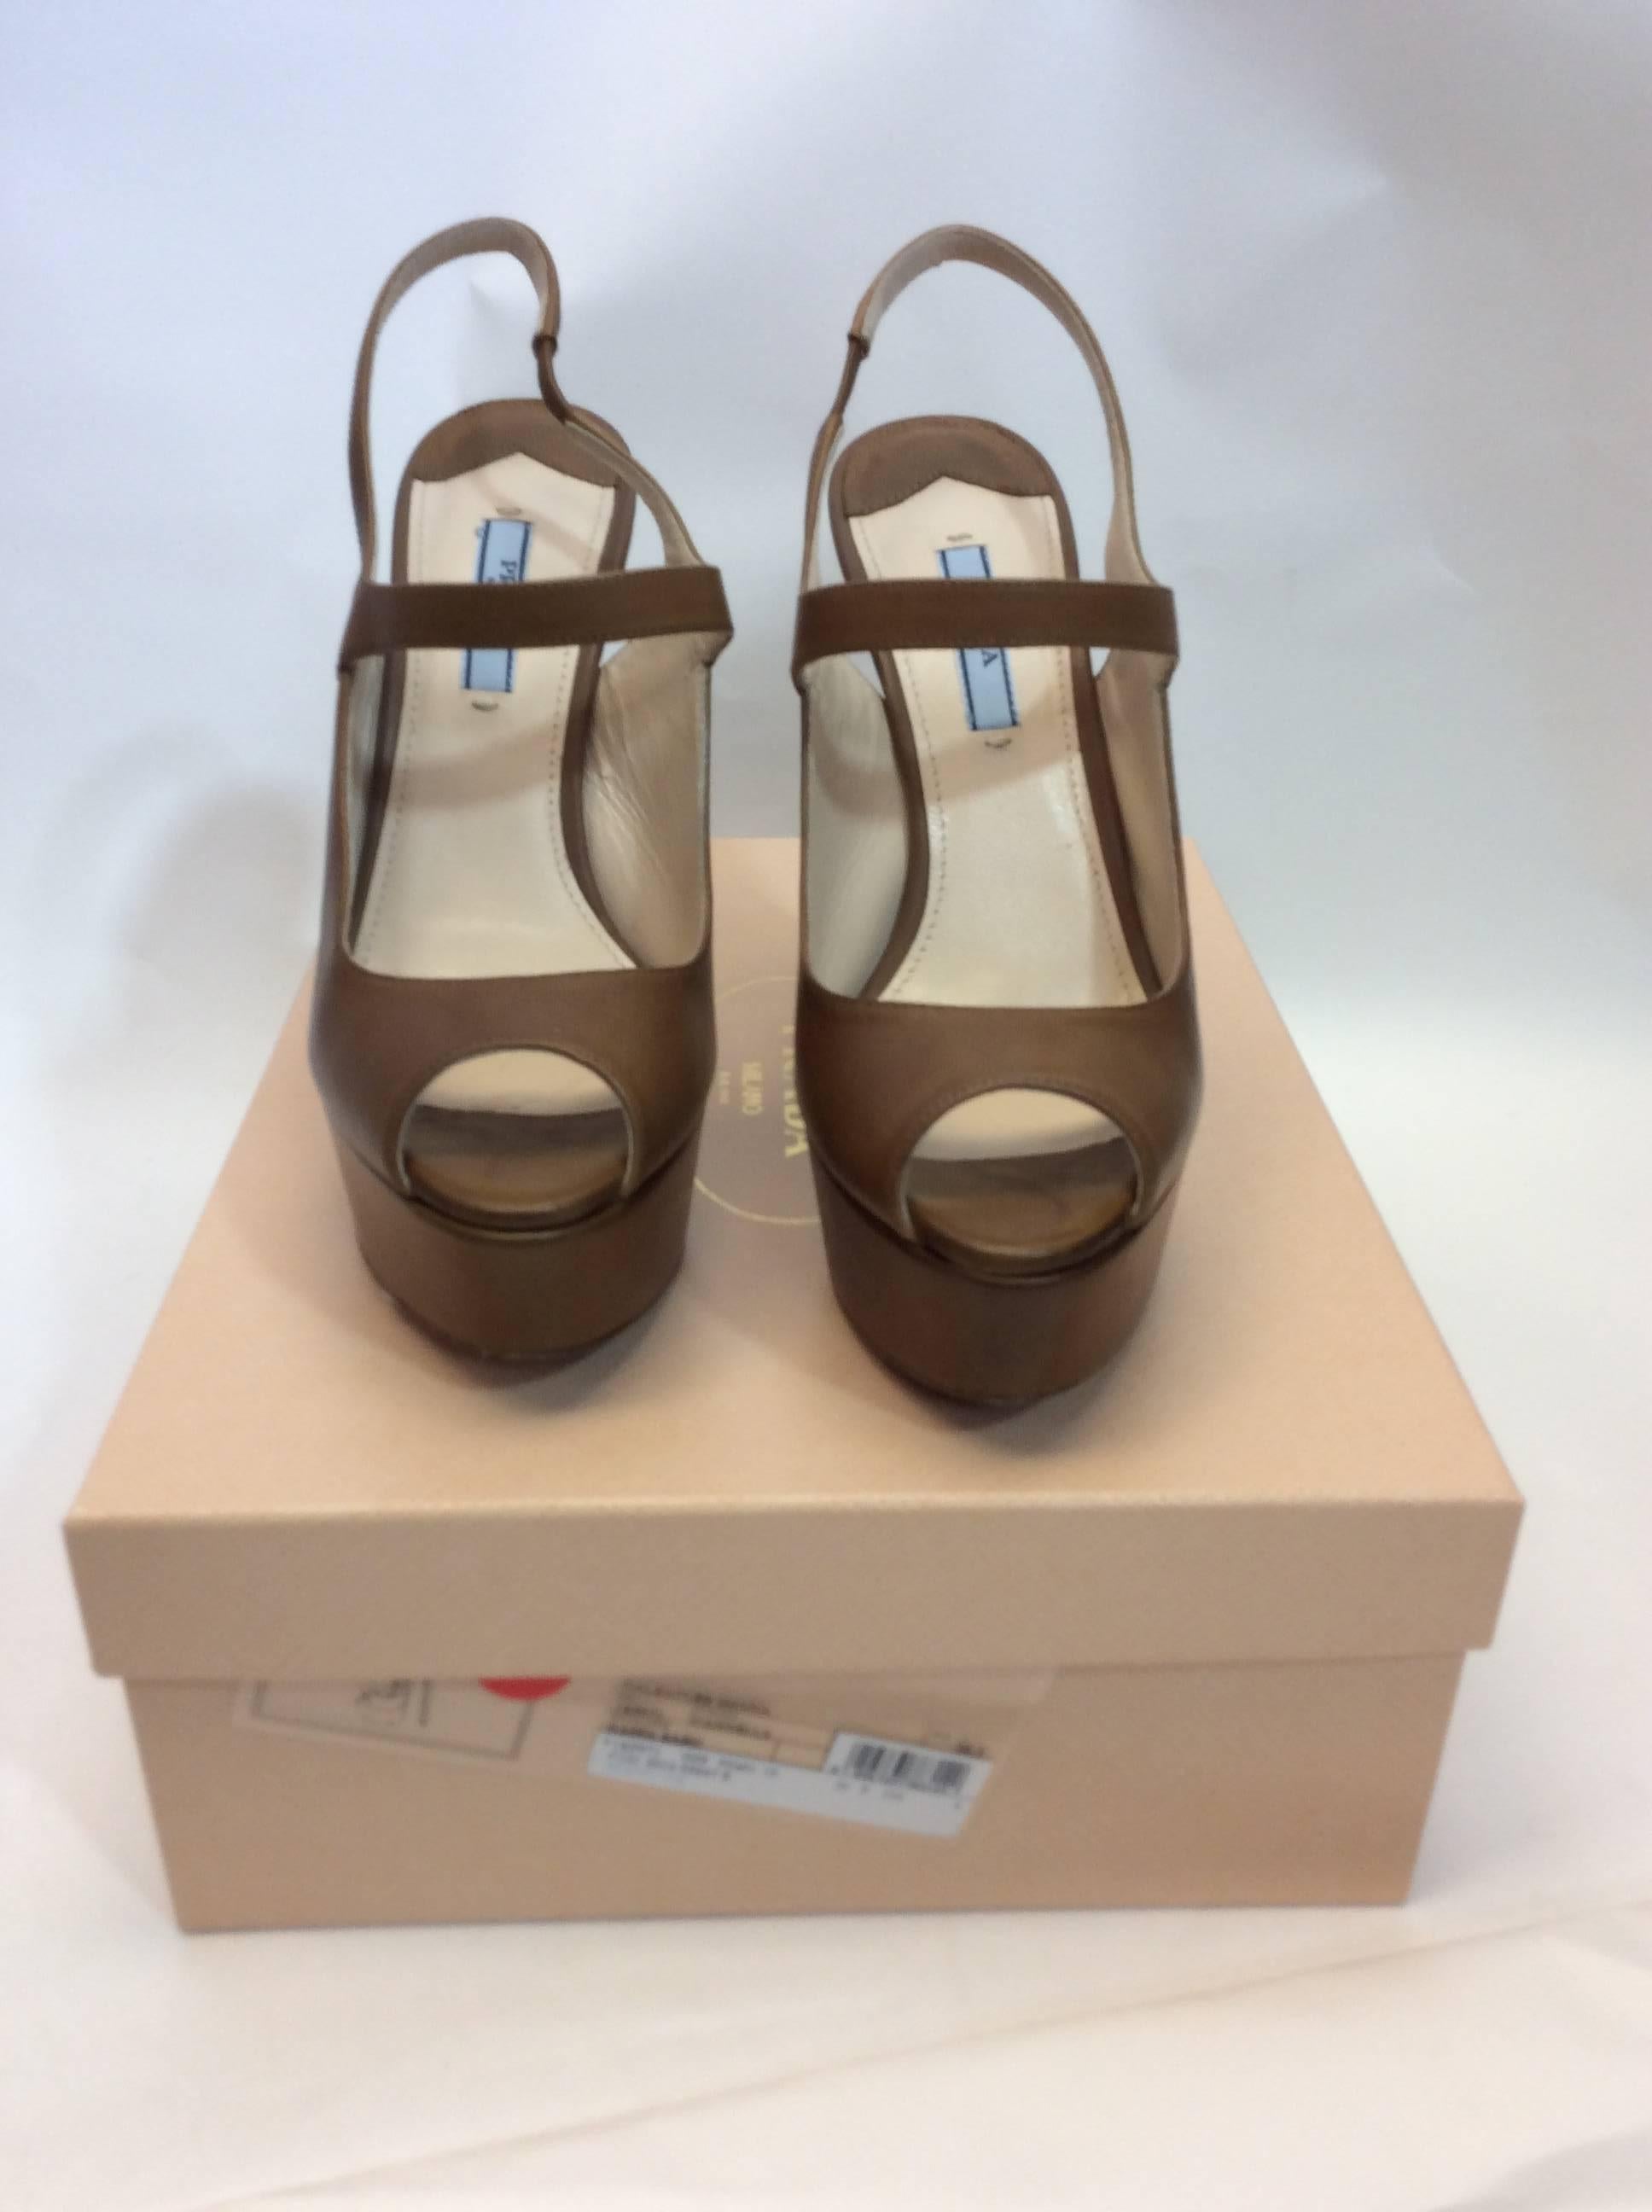 Prada Leather Peep Toe Platform Stiletto In Excellent Condition For Sale In Narberth, PA